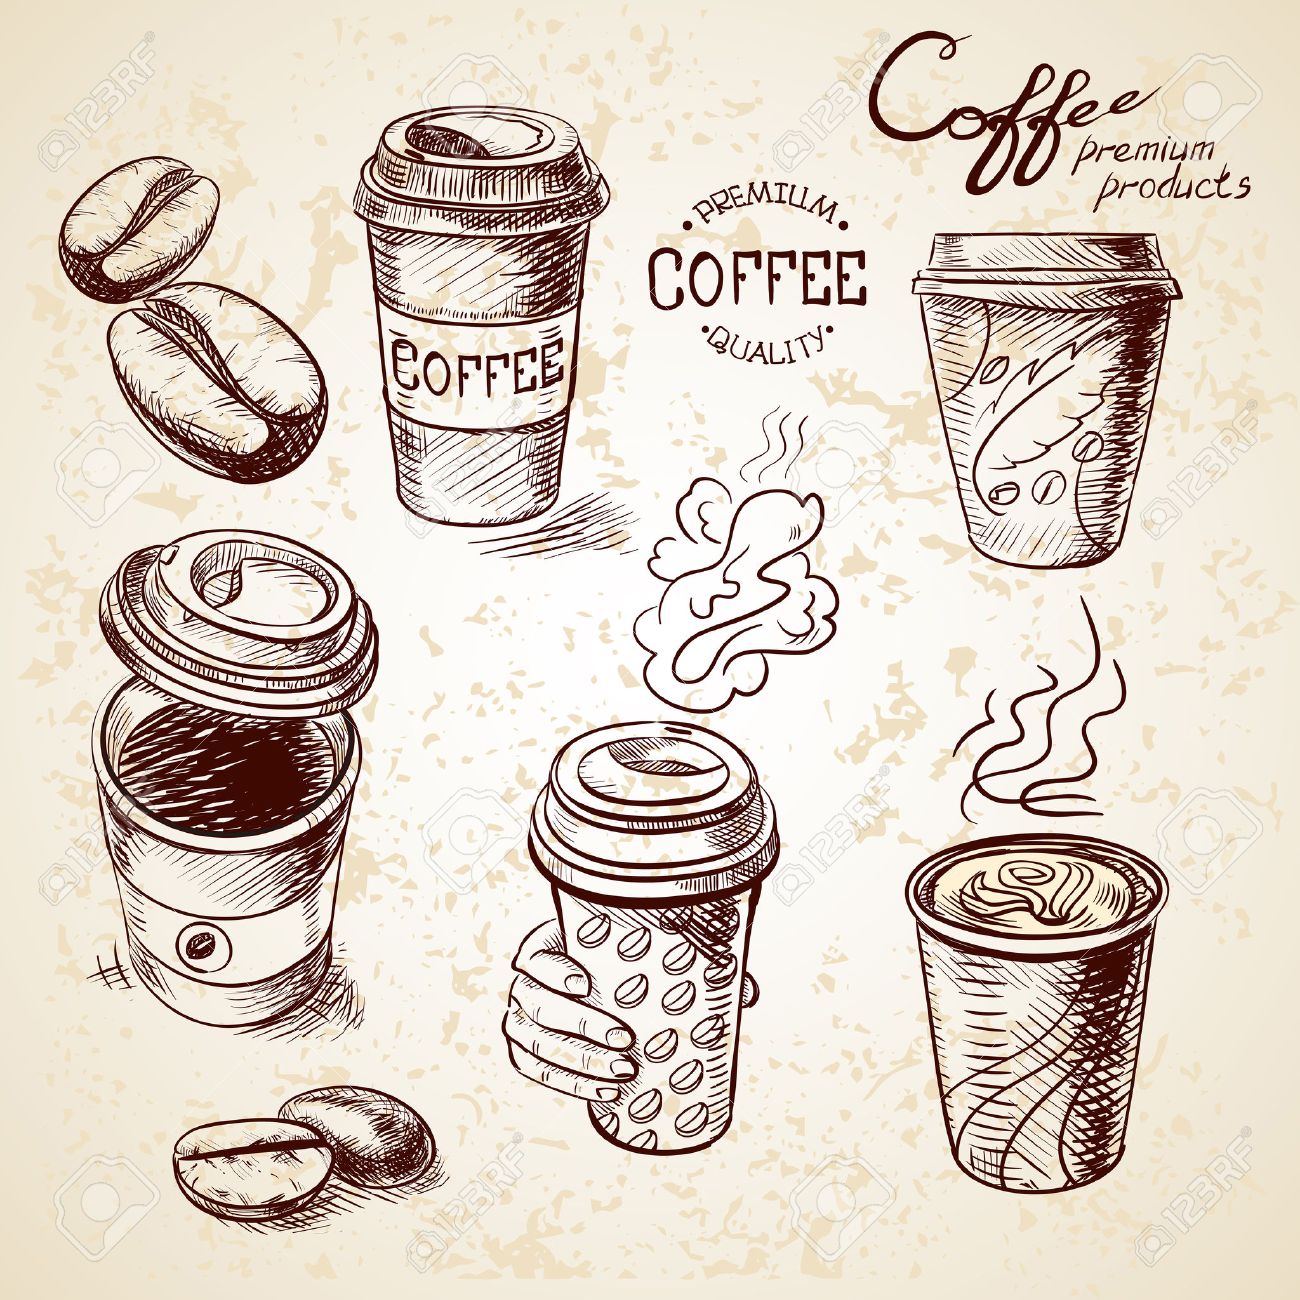 Download Paper Coffee Cup Drawing at GetDrawings.com | Free for ...